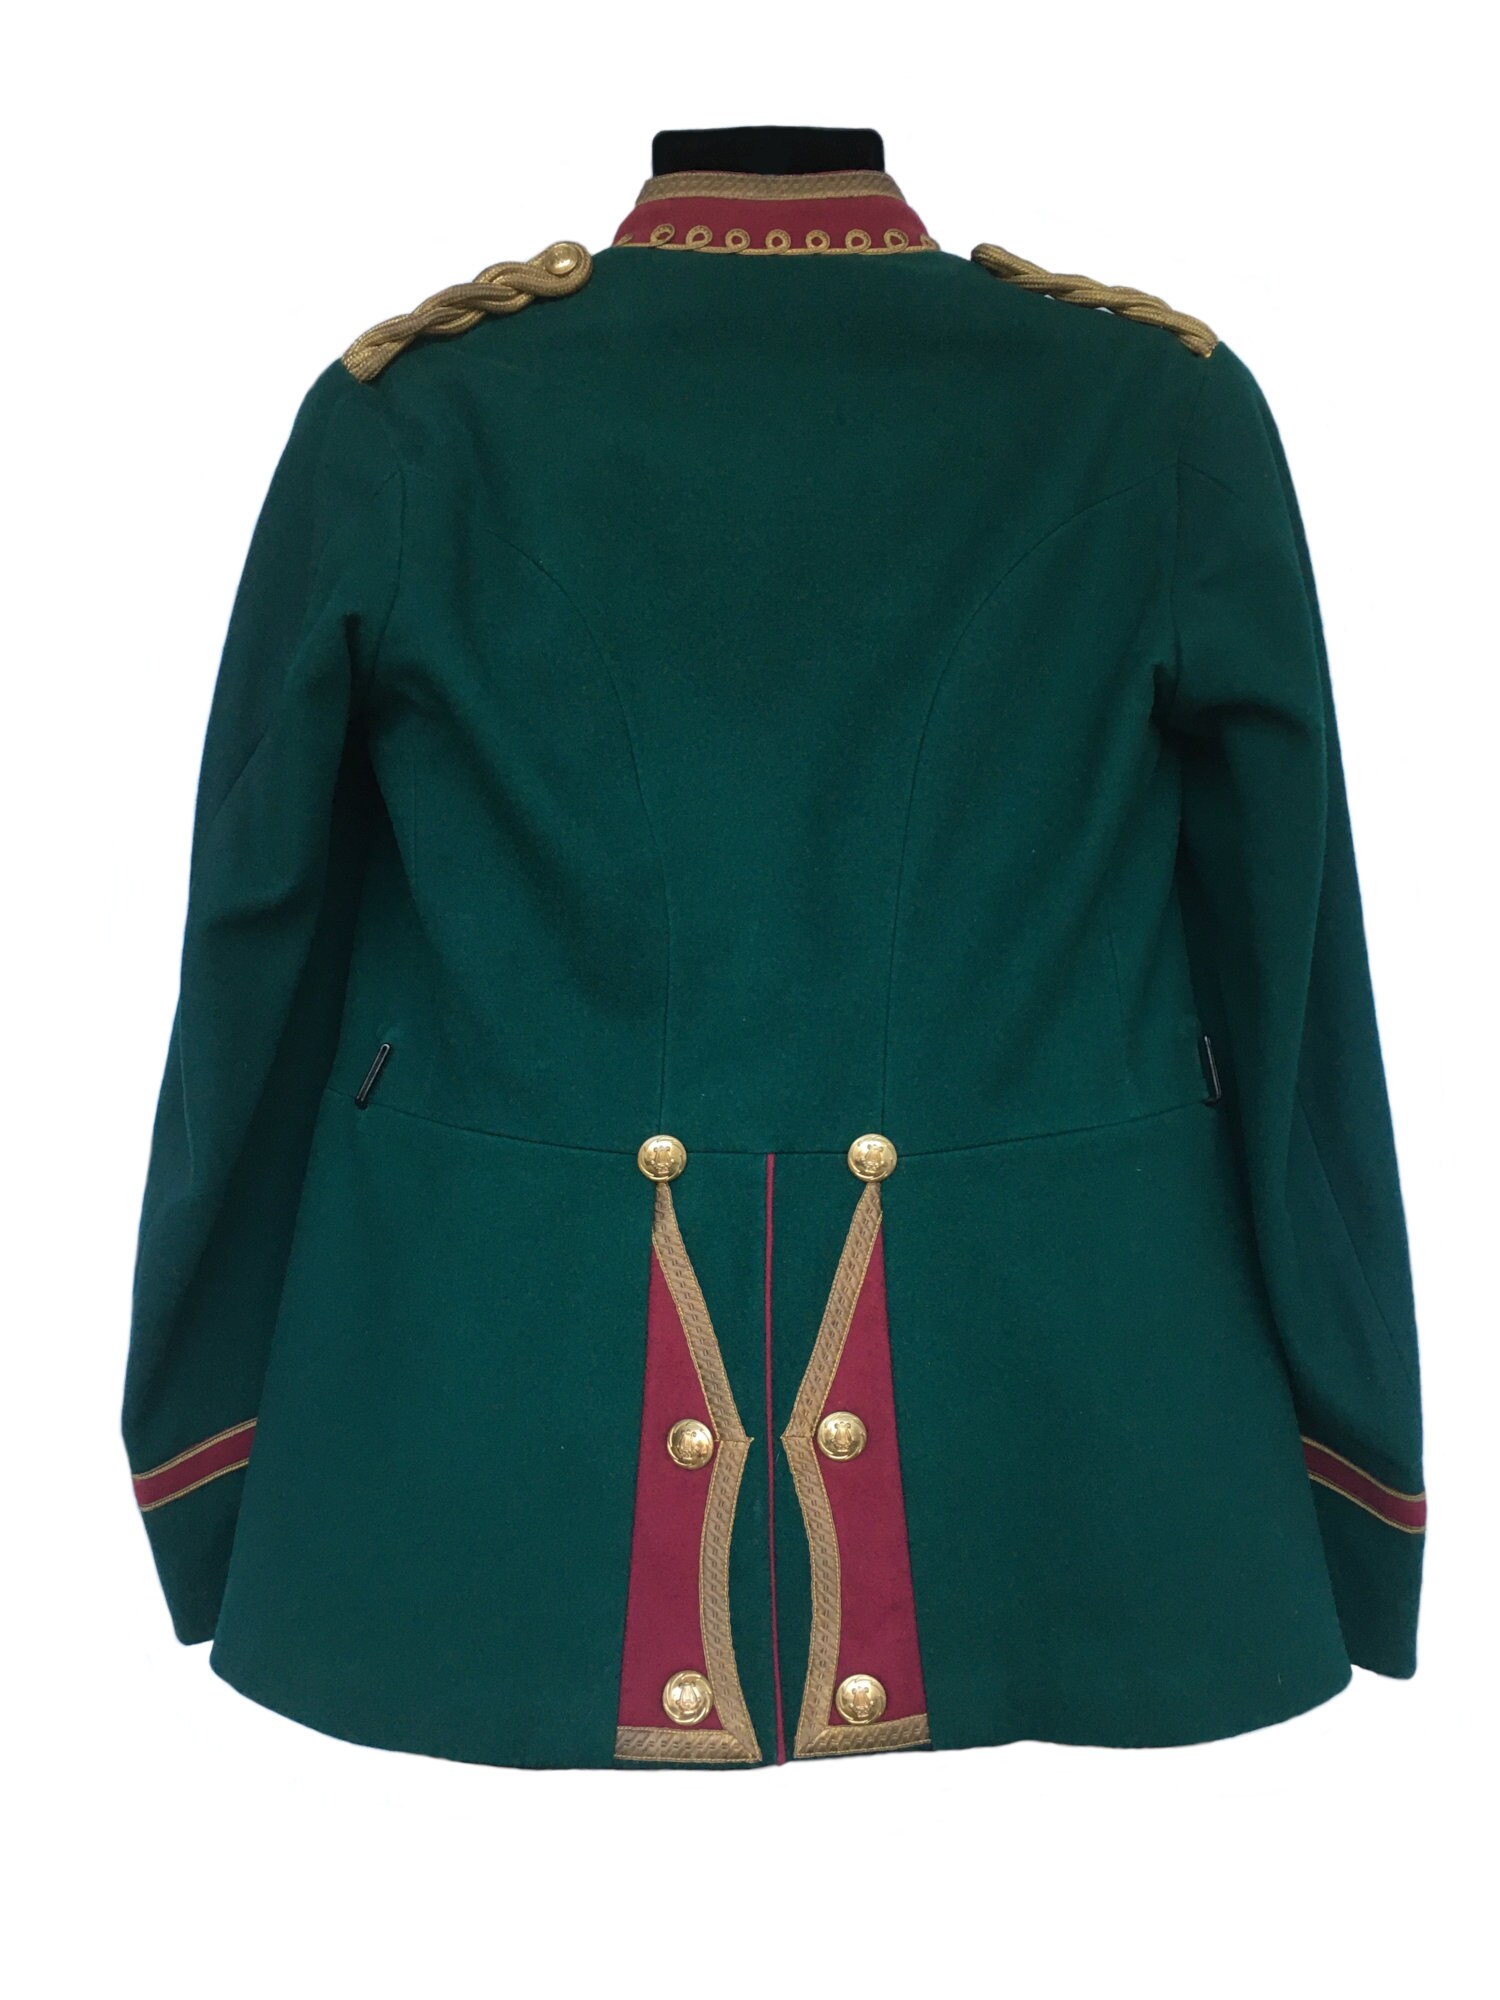 1930's Green Livery Band Jacket